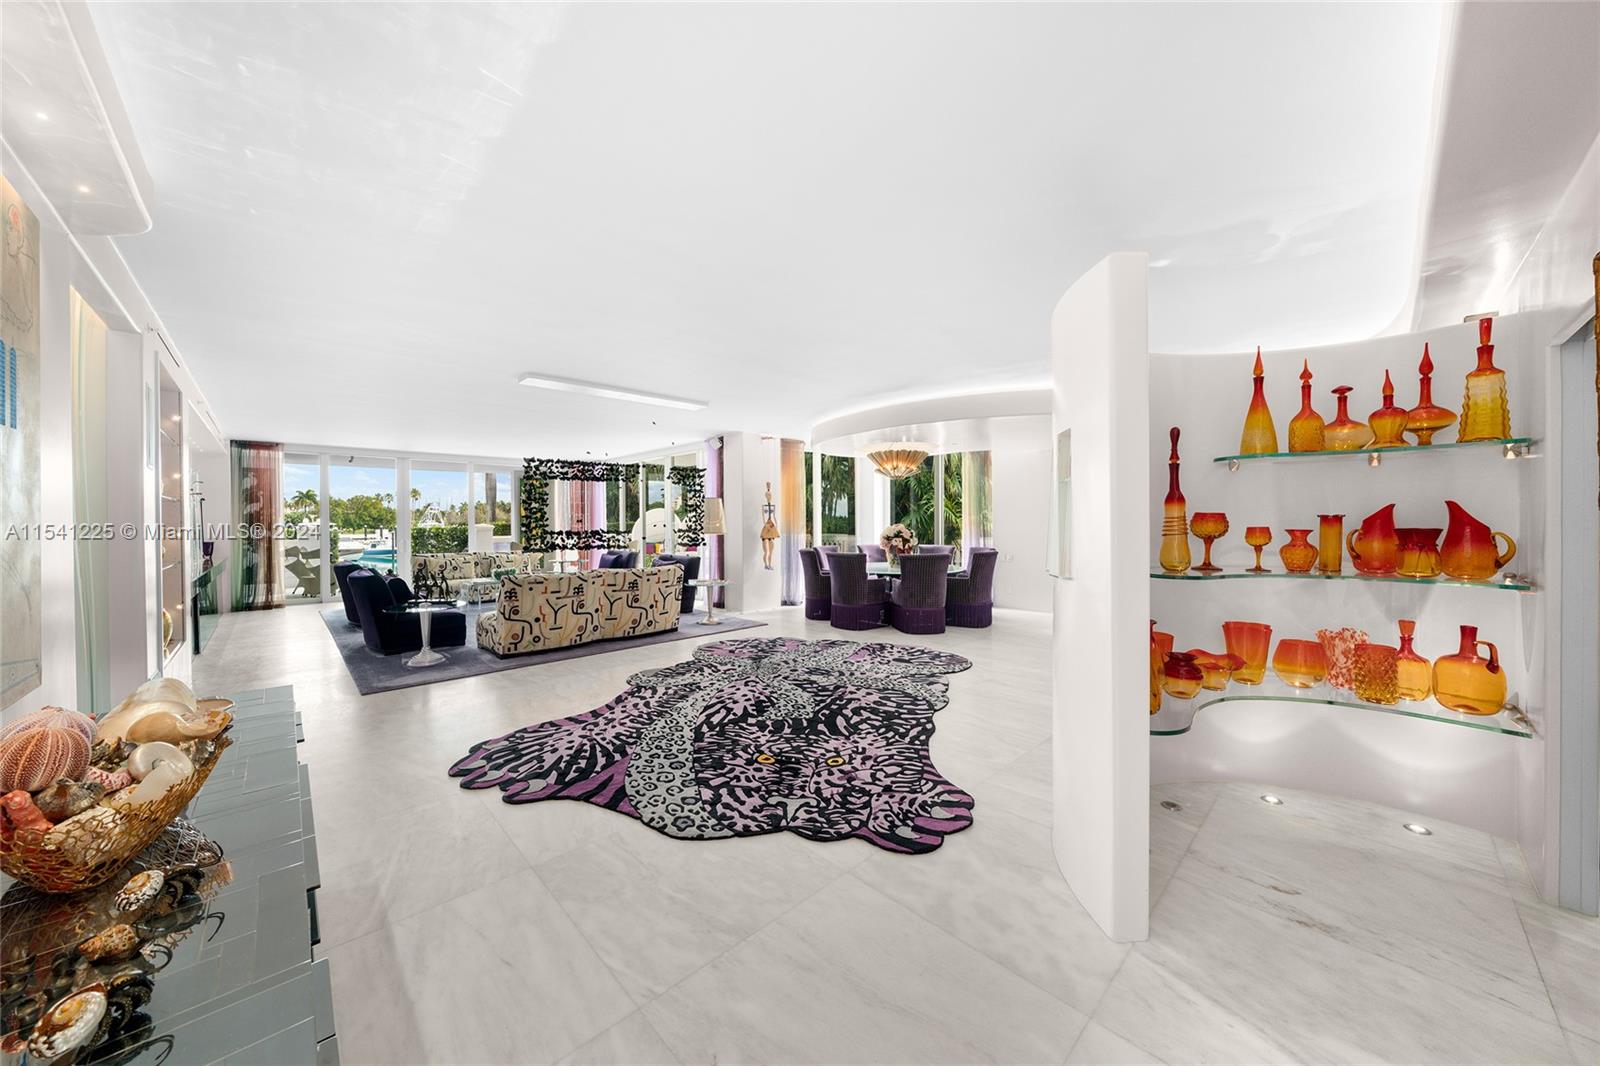 This spectacular one-of-a-kind 2-story townhouse is located in Harborview overlooking Fisher Island’s inner marina. Home features 4BR/4+1BA & over 6,000 SF of living area, marble & rich hardwood floors, glass doors, ceiling/wall accents. 1st floor offers a spacious living & dining layout & access to an expansive wraparound terrace w/direct marina views, sleek chef’s kitchen, sumptuous principal suite & luxurious spa-inspired bathroom. 2nd floor features an large open floor plan, family room w/home theater, soaring vaulted ceiling & dining terrace overlooking the marina. Fully equipped gym, dining space, a kitchen, plus 3BR/3BA. Amazing location-access to path near all the best Fisher amenities. Garage parking - 4 cars & 4 golf carts. 72’ dock right behind unit can be acquired separately.